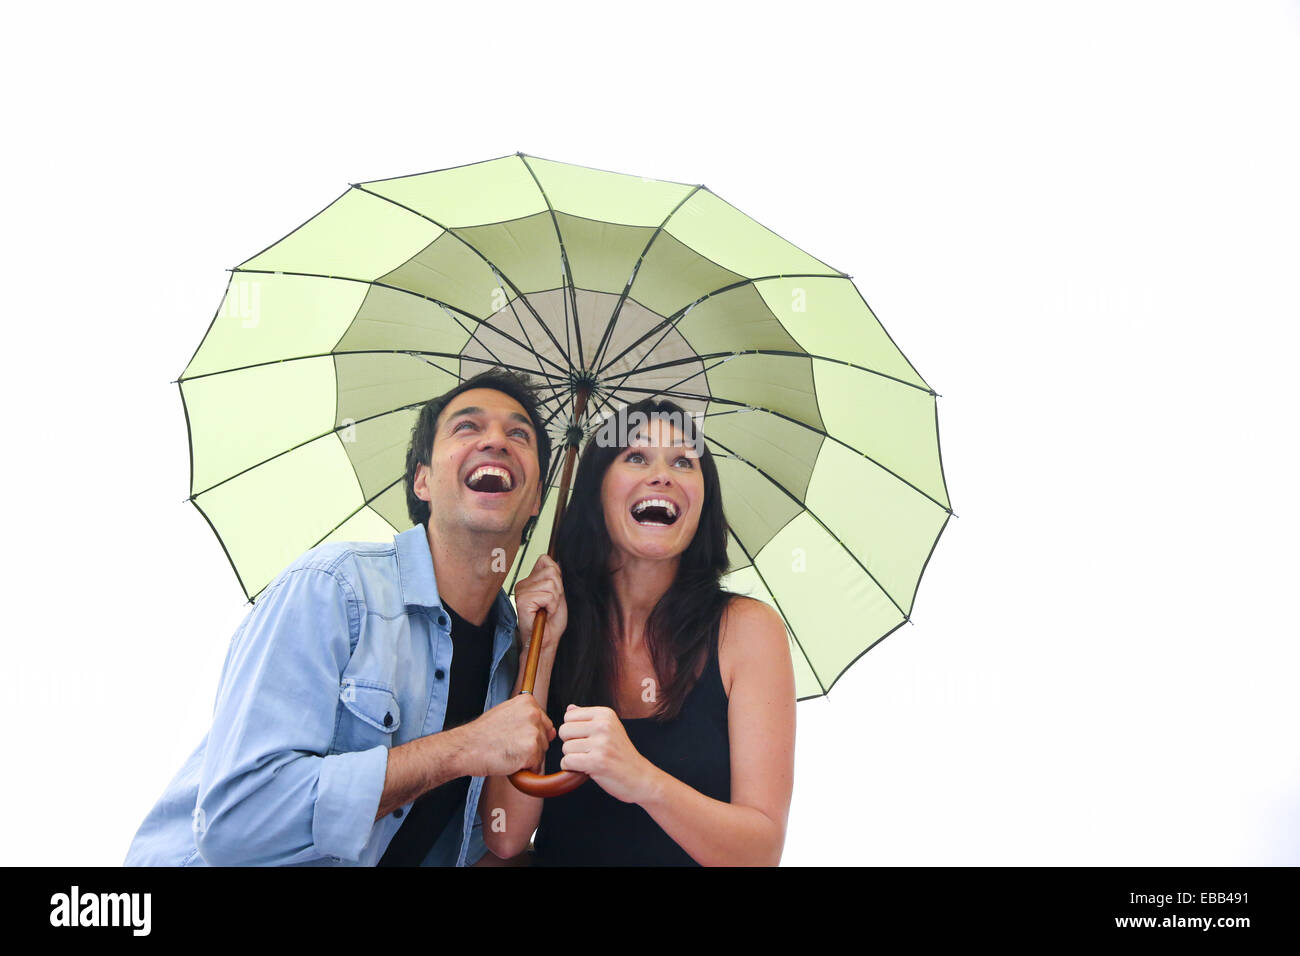 Couple in their 30´s smiling under umbrella. Stock Photo